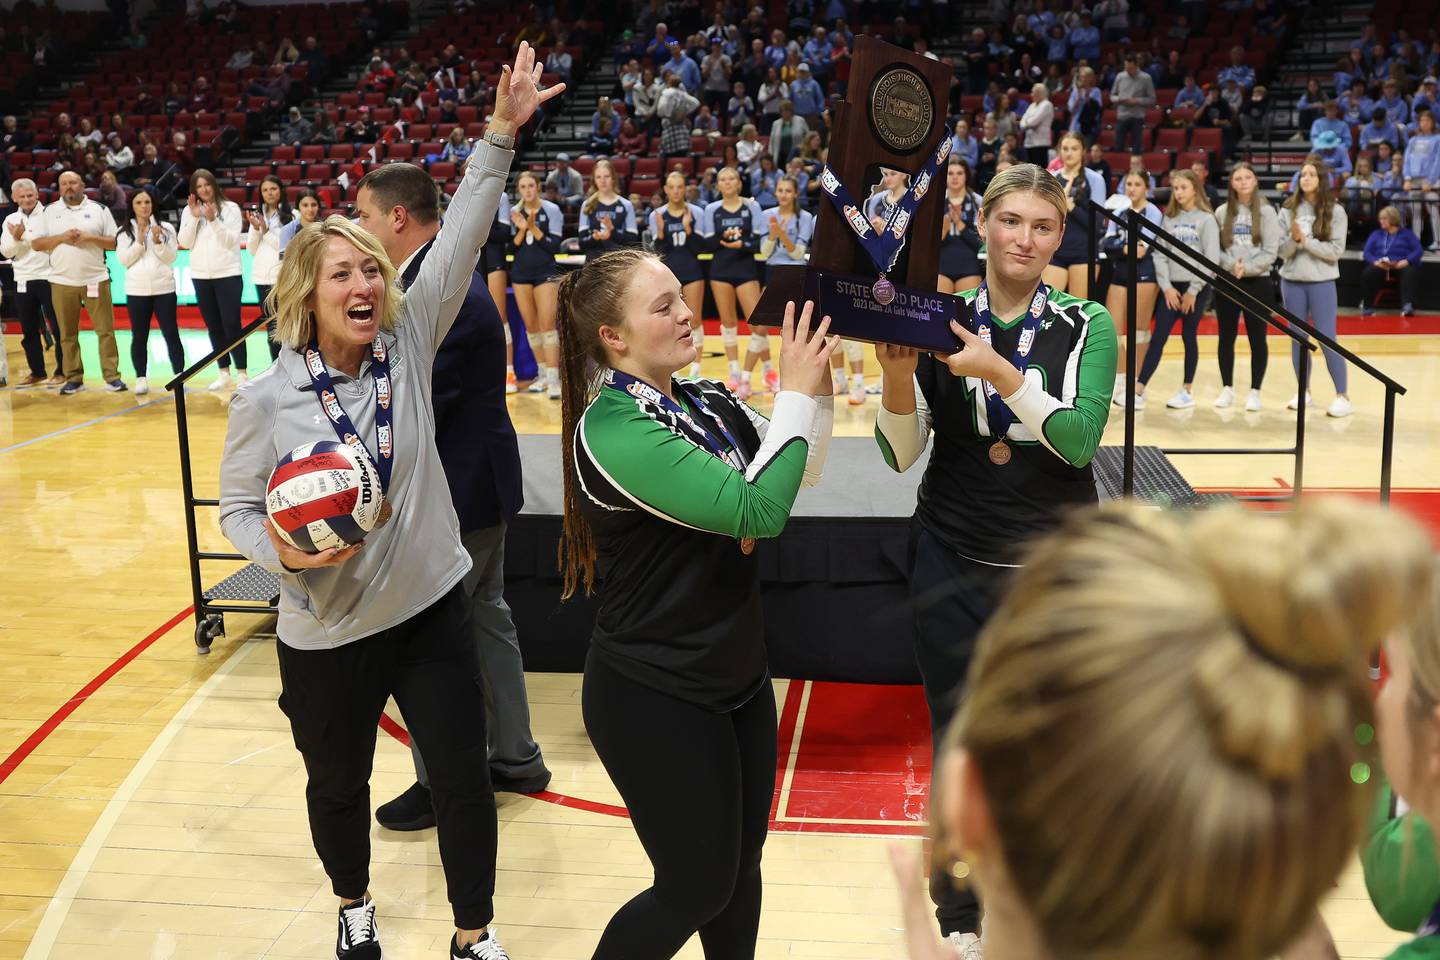 Rock Falls’ team captains Denali Stonitsch, center, and Claire Bickett receive the Class 2A Third Place trophy as head coach Shelia Pillars celebrates after the Rockets win against Carmi-White County in the Class 2A Volleyball Third Place match on Saturday, Nov. 11, 2023 in Normal.